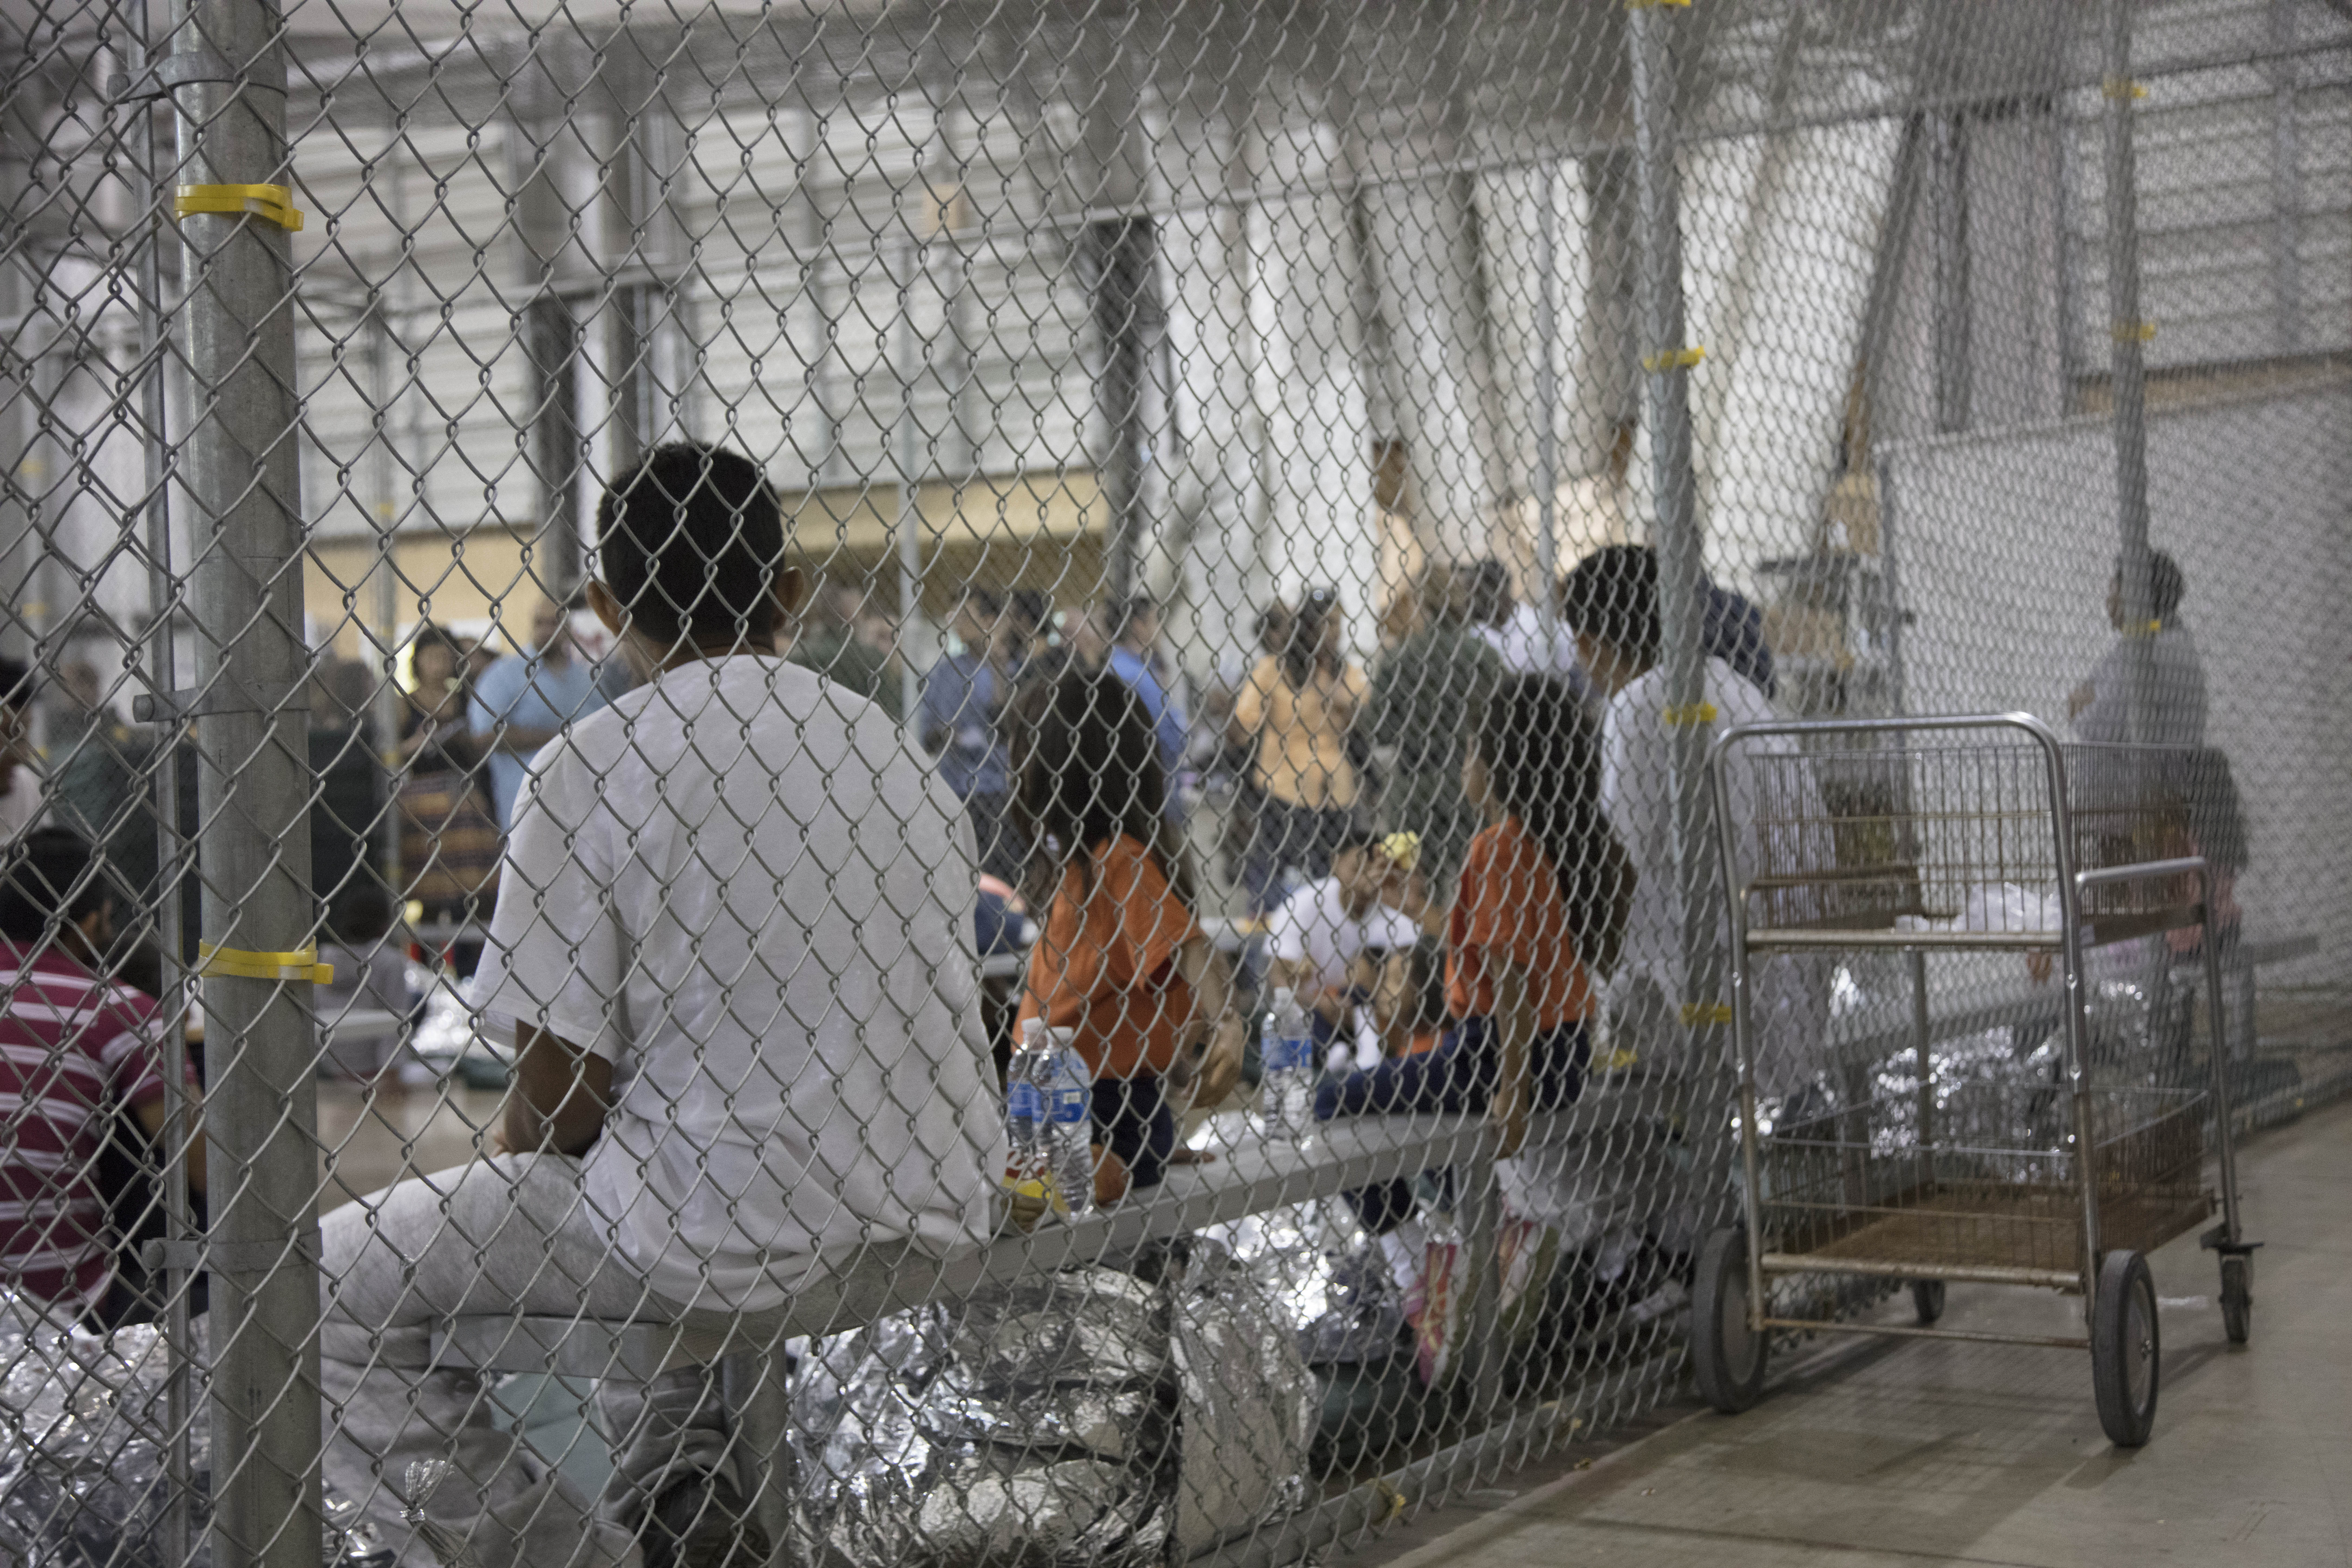 Federal judge orders fair hearings for immigration detainees